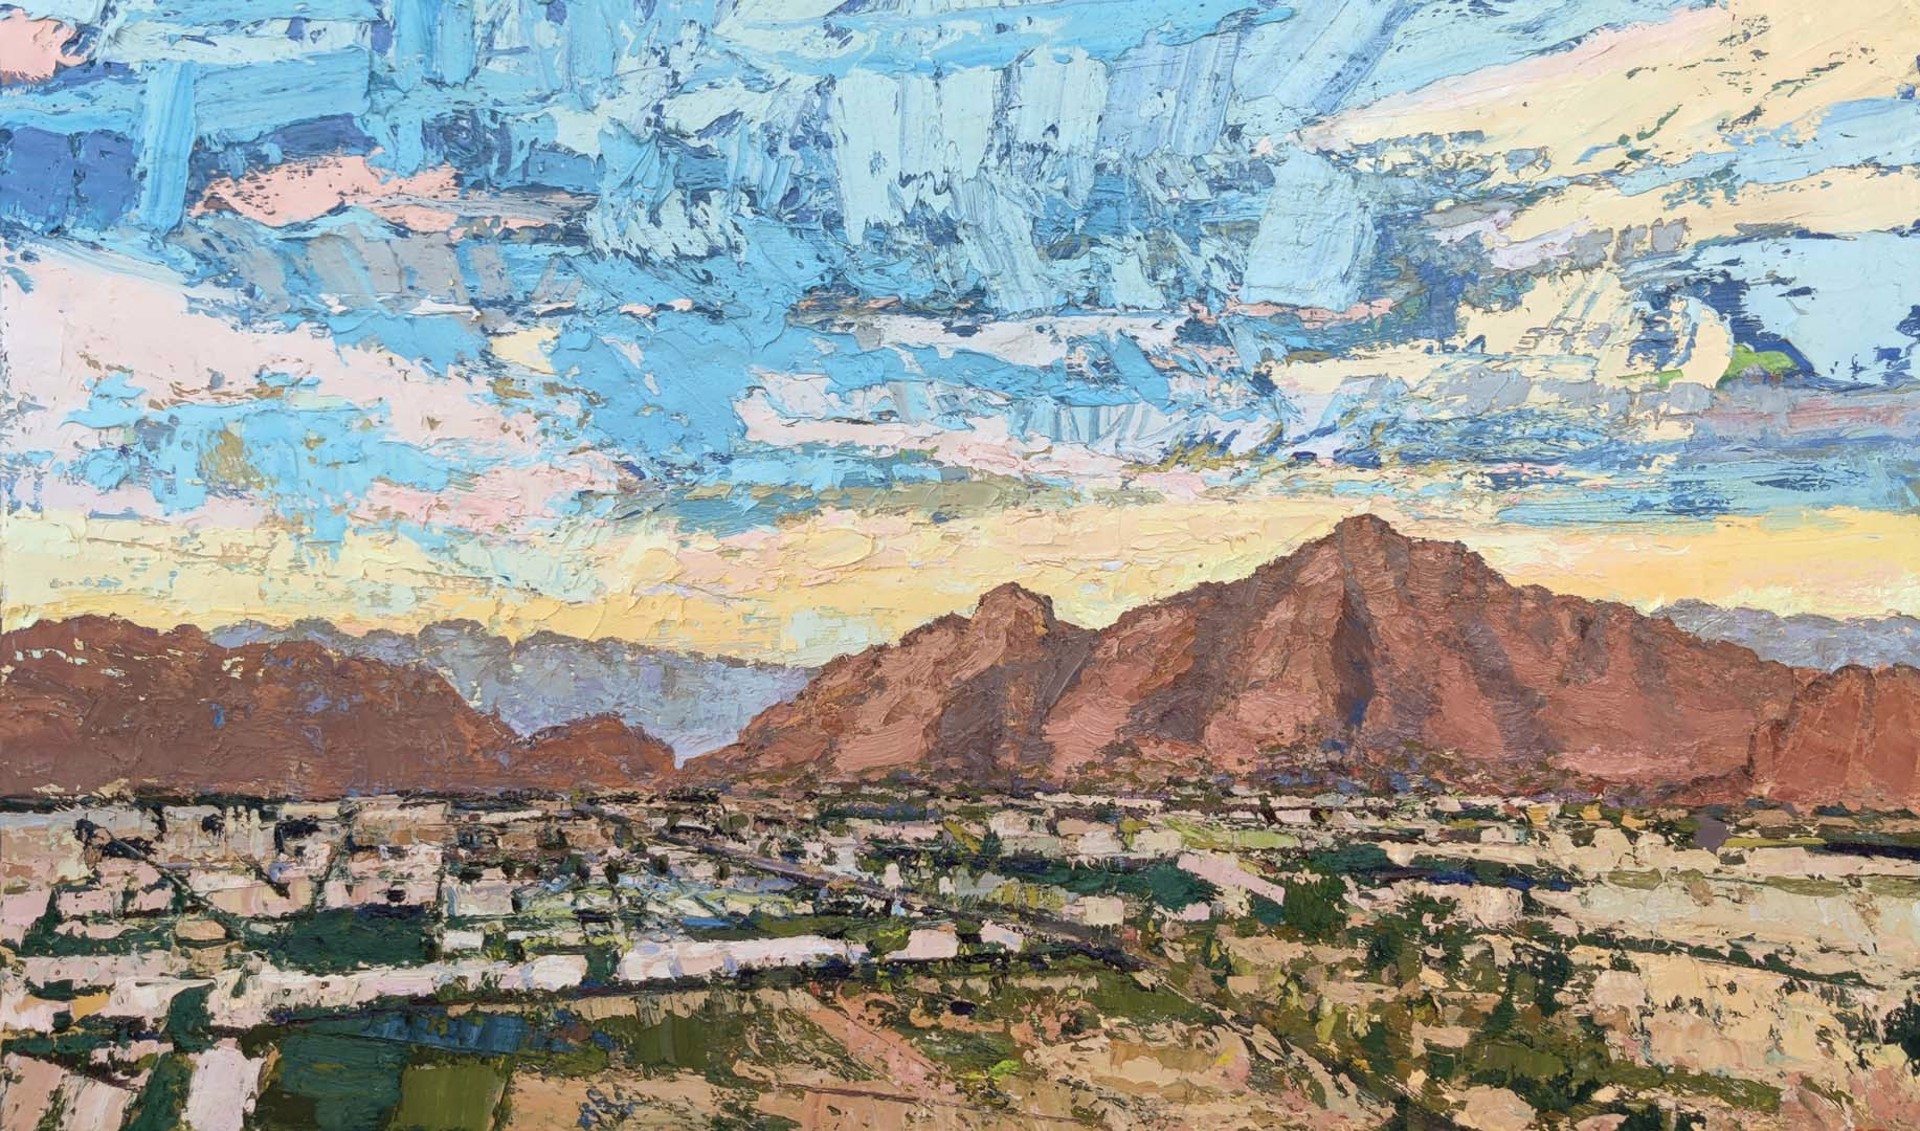 Camelback by Brian Cote